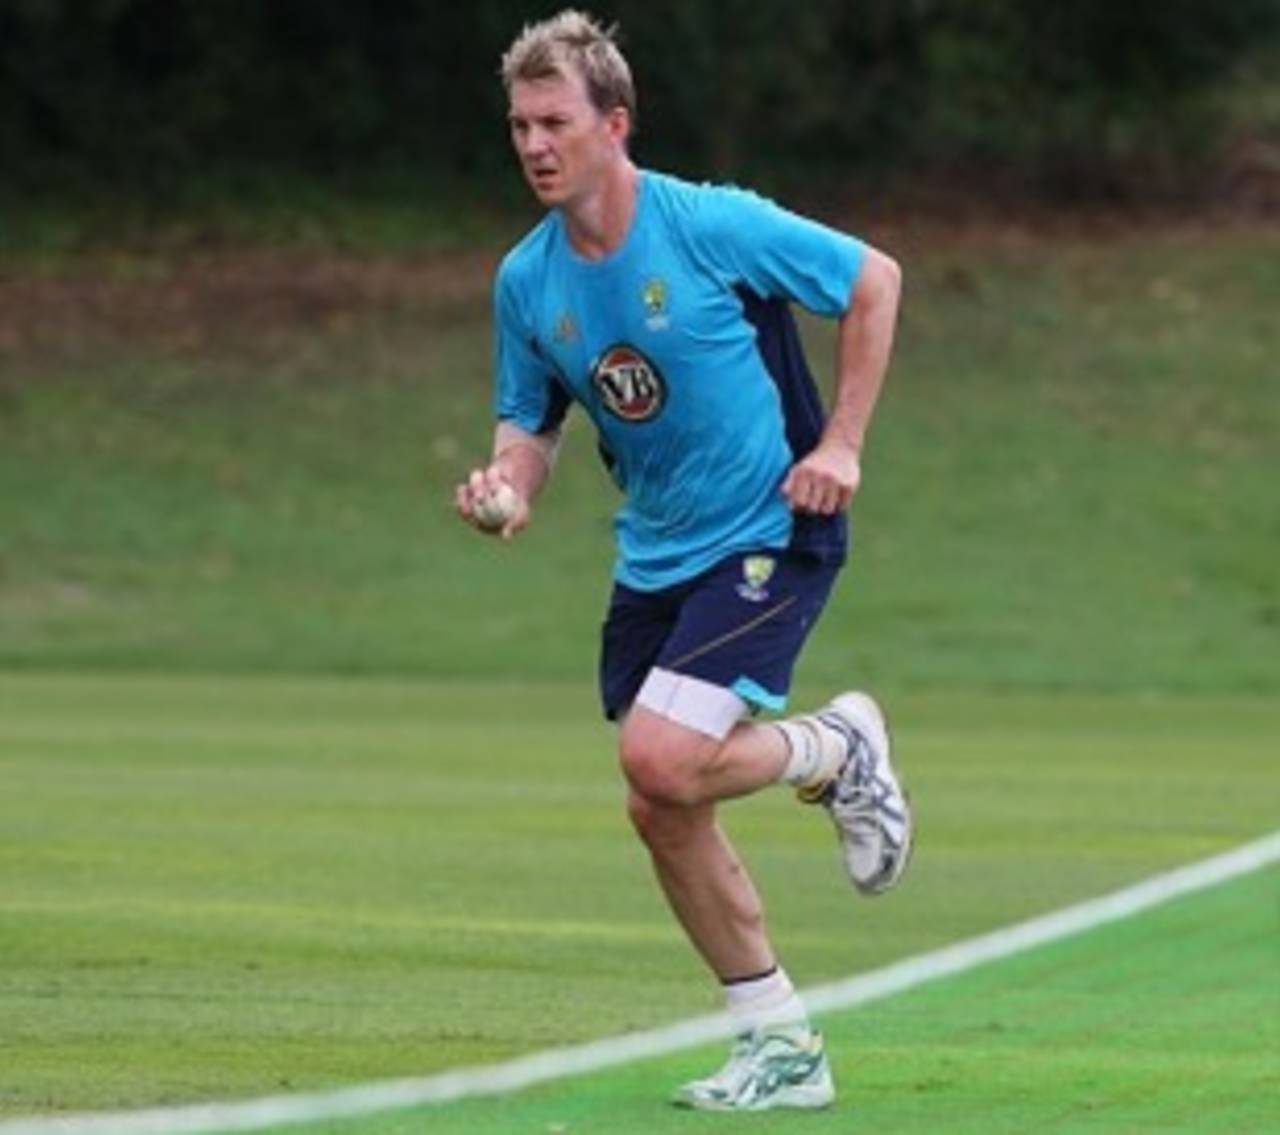 Brett Lee runs in to bowl at a practice session, Brisbane, April 22, 2010